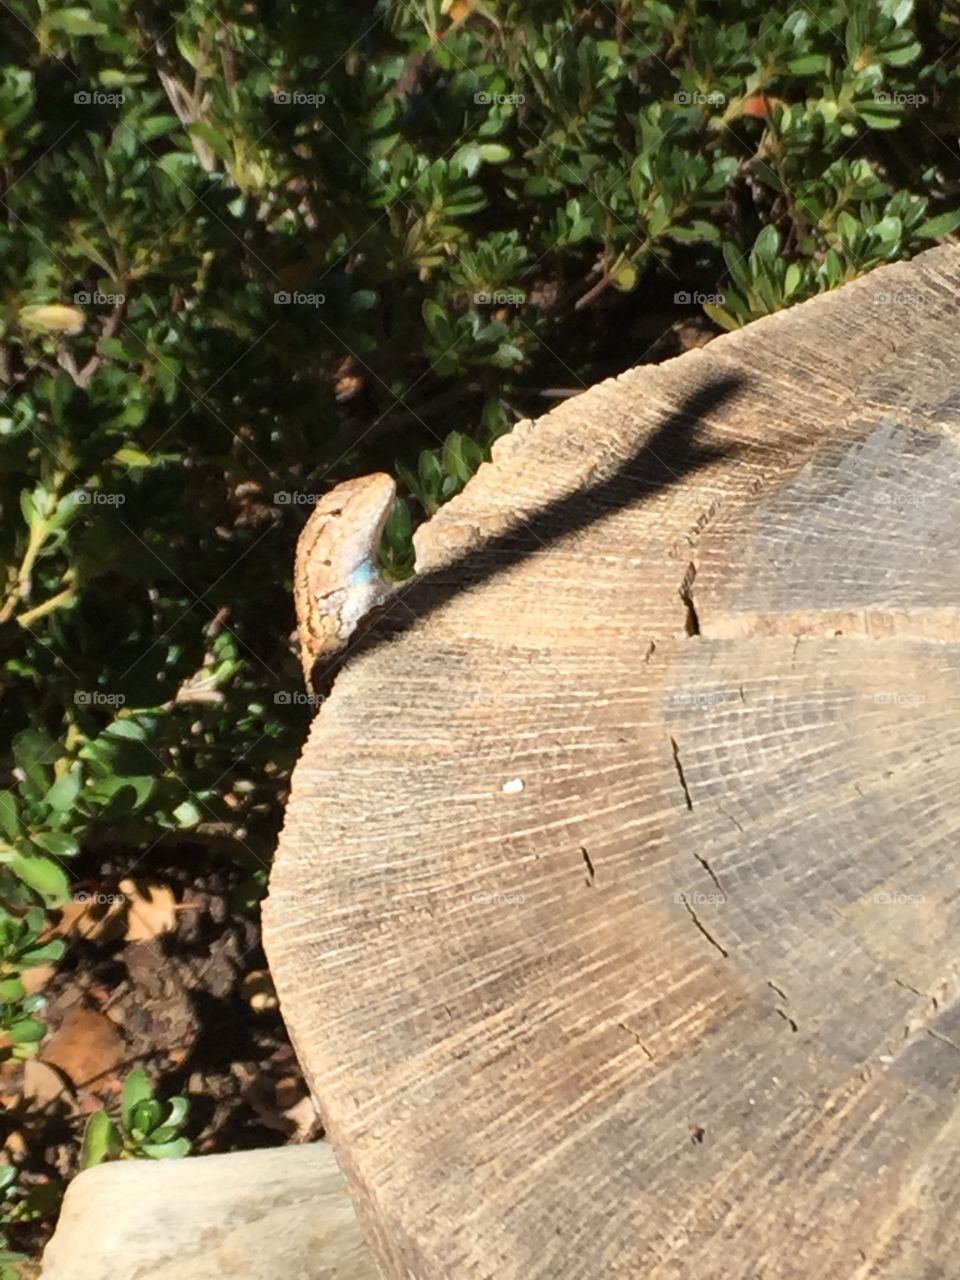 Look out - all clear!. Lizard poking his head over edge of stump checking out the area. To continue on with his journey.